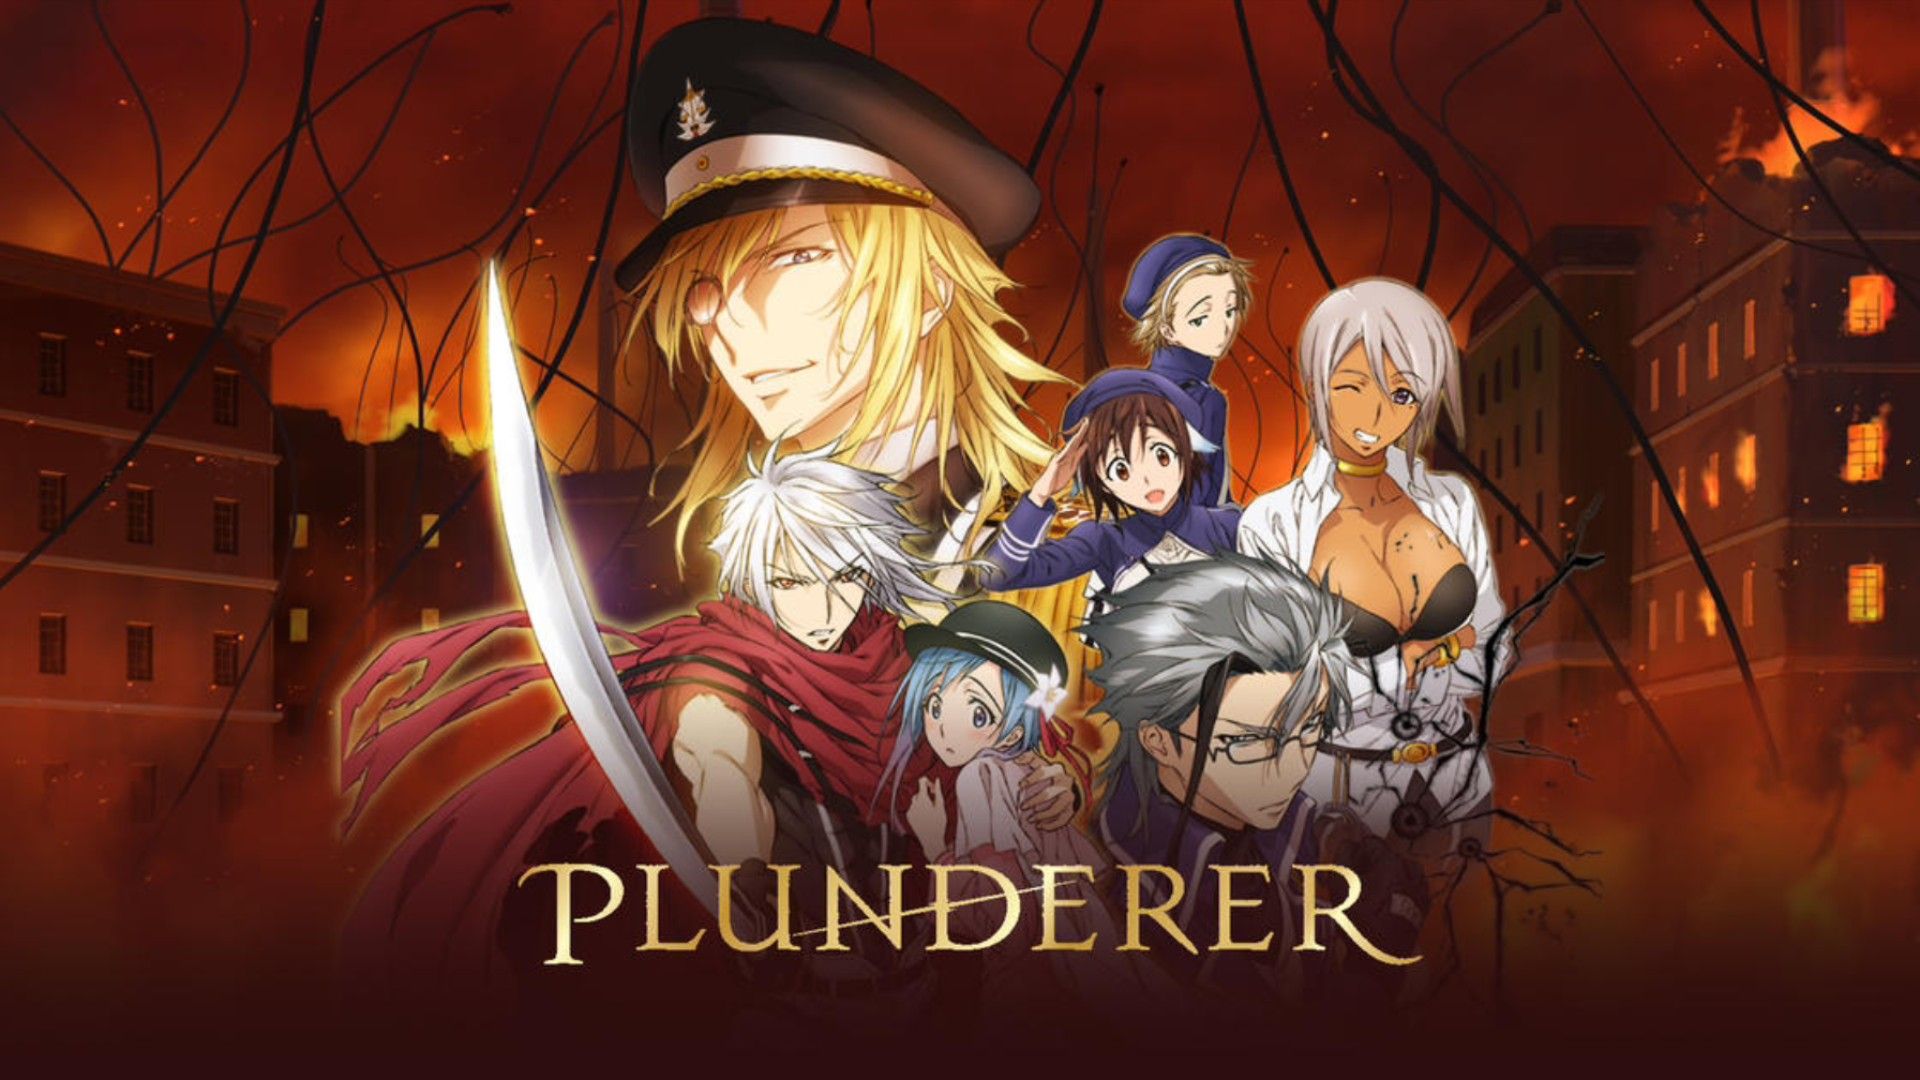 Plunderer Episode 4 Plunderer Episode 4 In which we learn the